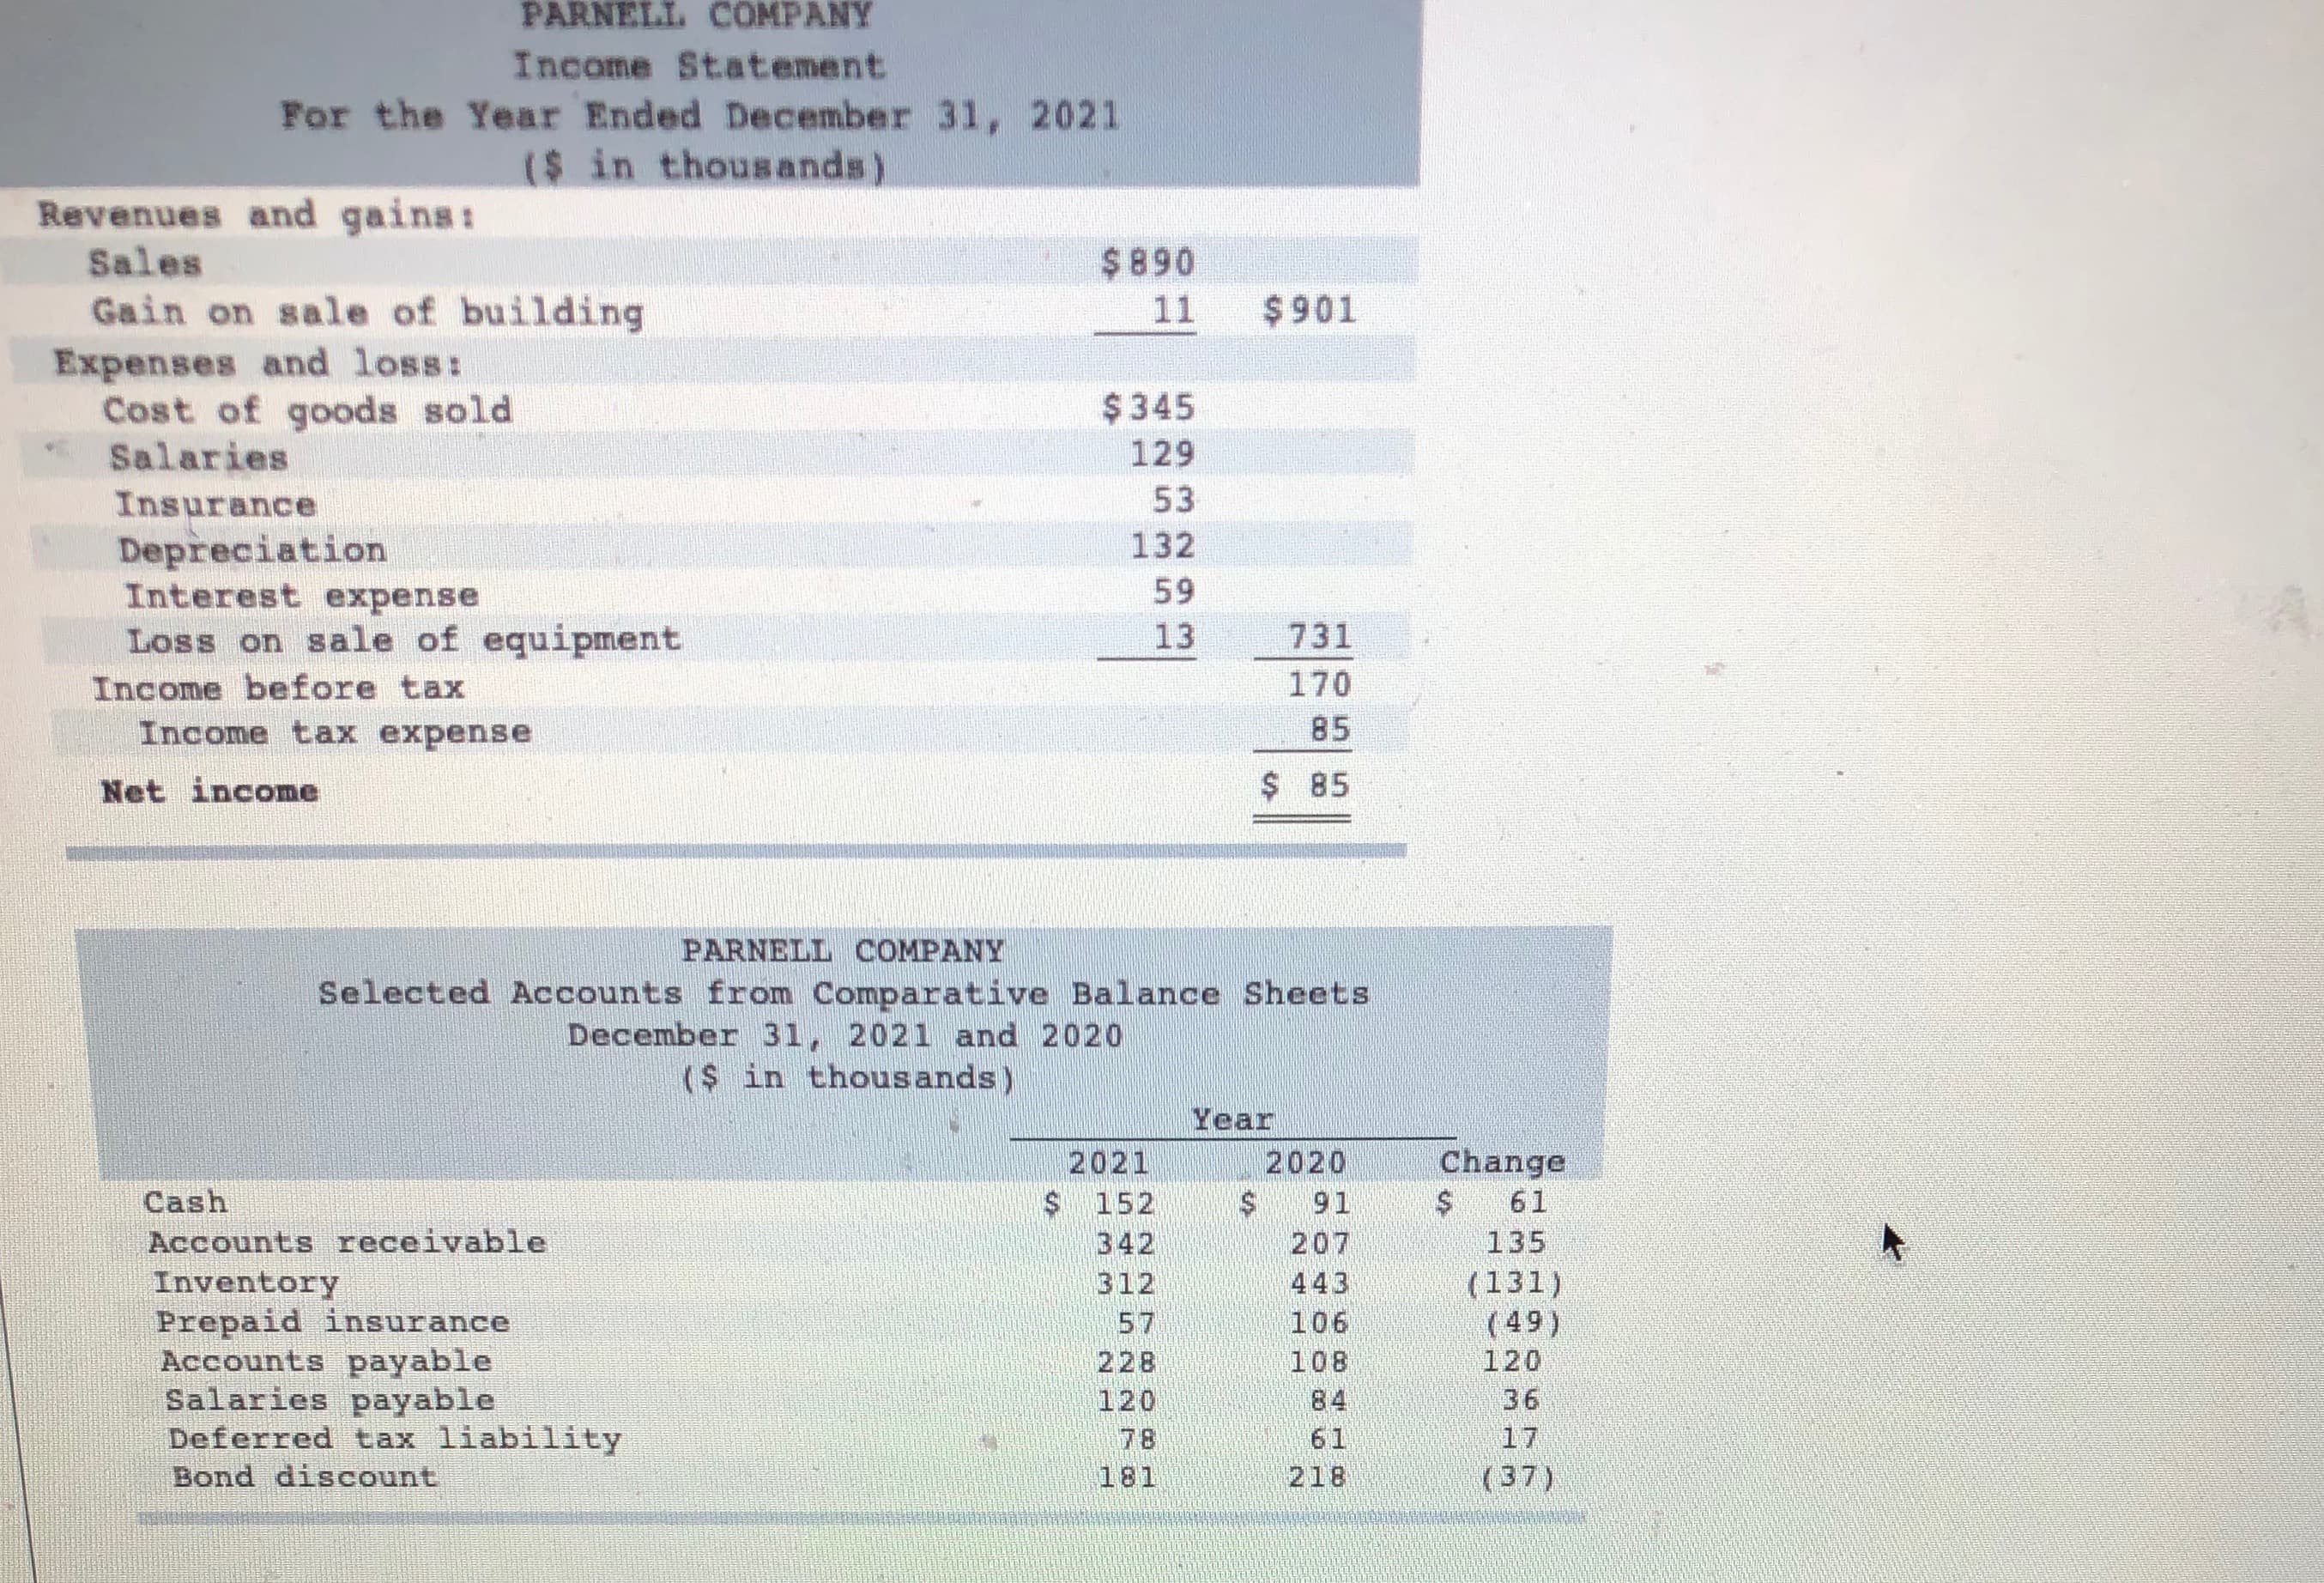 PARNELL COMPANY
Income Statement
For the Year Ended December 31, 2021
($ in thousands)
Revenues and gains:
Sales
Gain on sale of building
Expenses and loss:
Cost of goods sold
Salaries
$890
11
$901
$345
129
Insurance
53
Depreciation
Interest expense
Loss on sale of equipment
132
59
13
731
170
Income before tax
Income tax expense
85
Net income
$ 85
PARNELL COMPANY
Selected Accounts from Comparative Balance Sheets
December 31, 2021 and 2020
($ in thousands)
Year
2020
Change
2021
$ 152
Cash
91
61
Accounts receivable
Inventory
Prepaid insurance
Accounts payable
Salaries payable
Deferred tax liability
Bond discount
342
207
135
312
443
(131)
(49)
120
36
57
106
228
108
120
78
84
61
218
17
181
(37)
